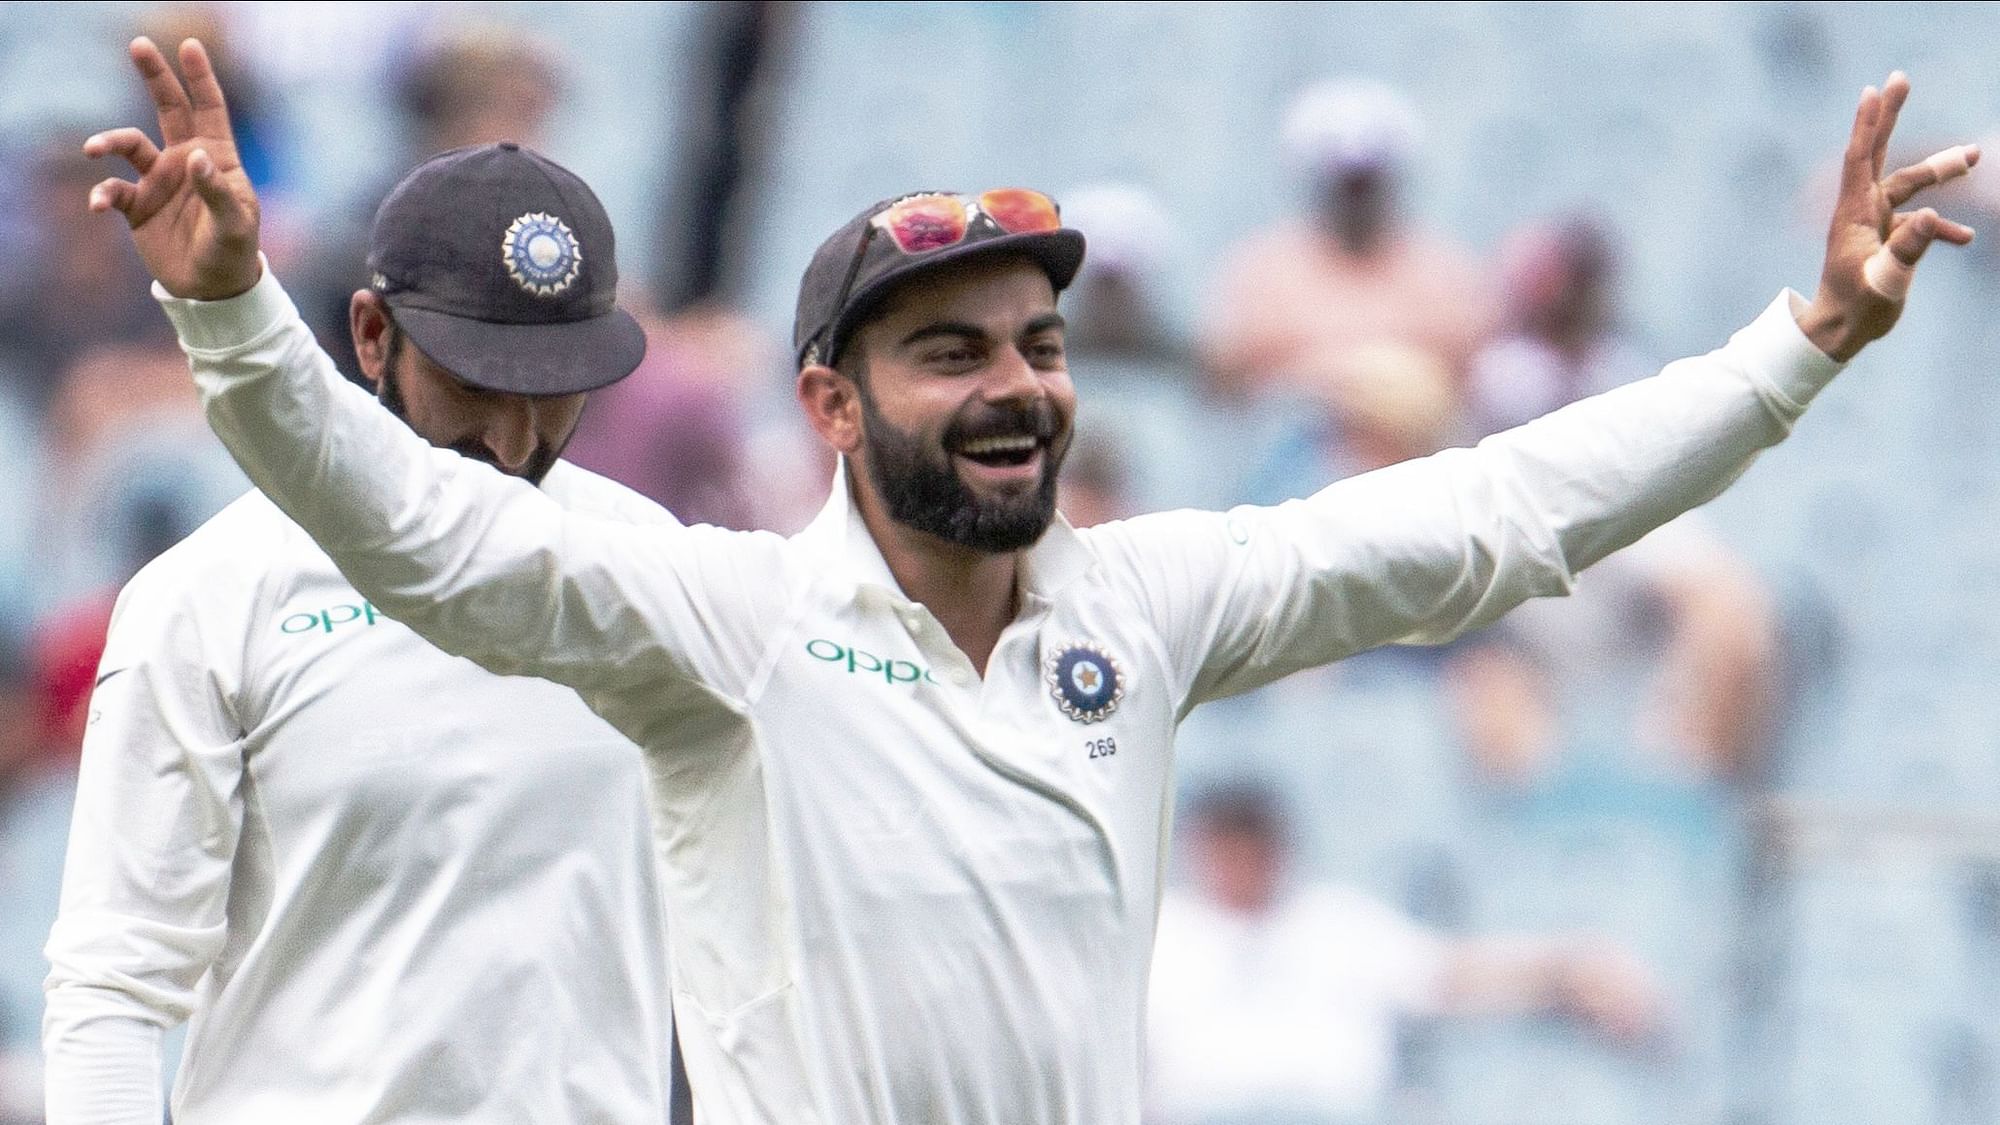 Virat Kohli has ‘rested’ the most among any other Indian cricketer in the last year, but he’s also outscored every cricketer in the world.&nbsp;